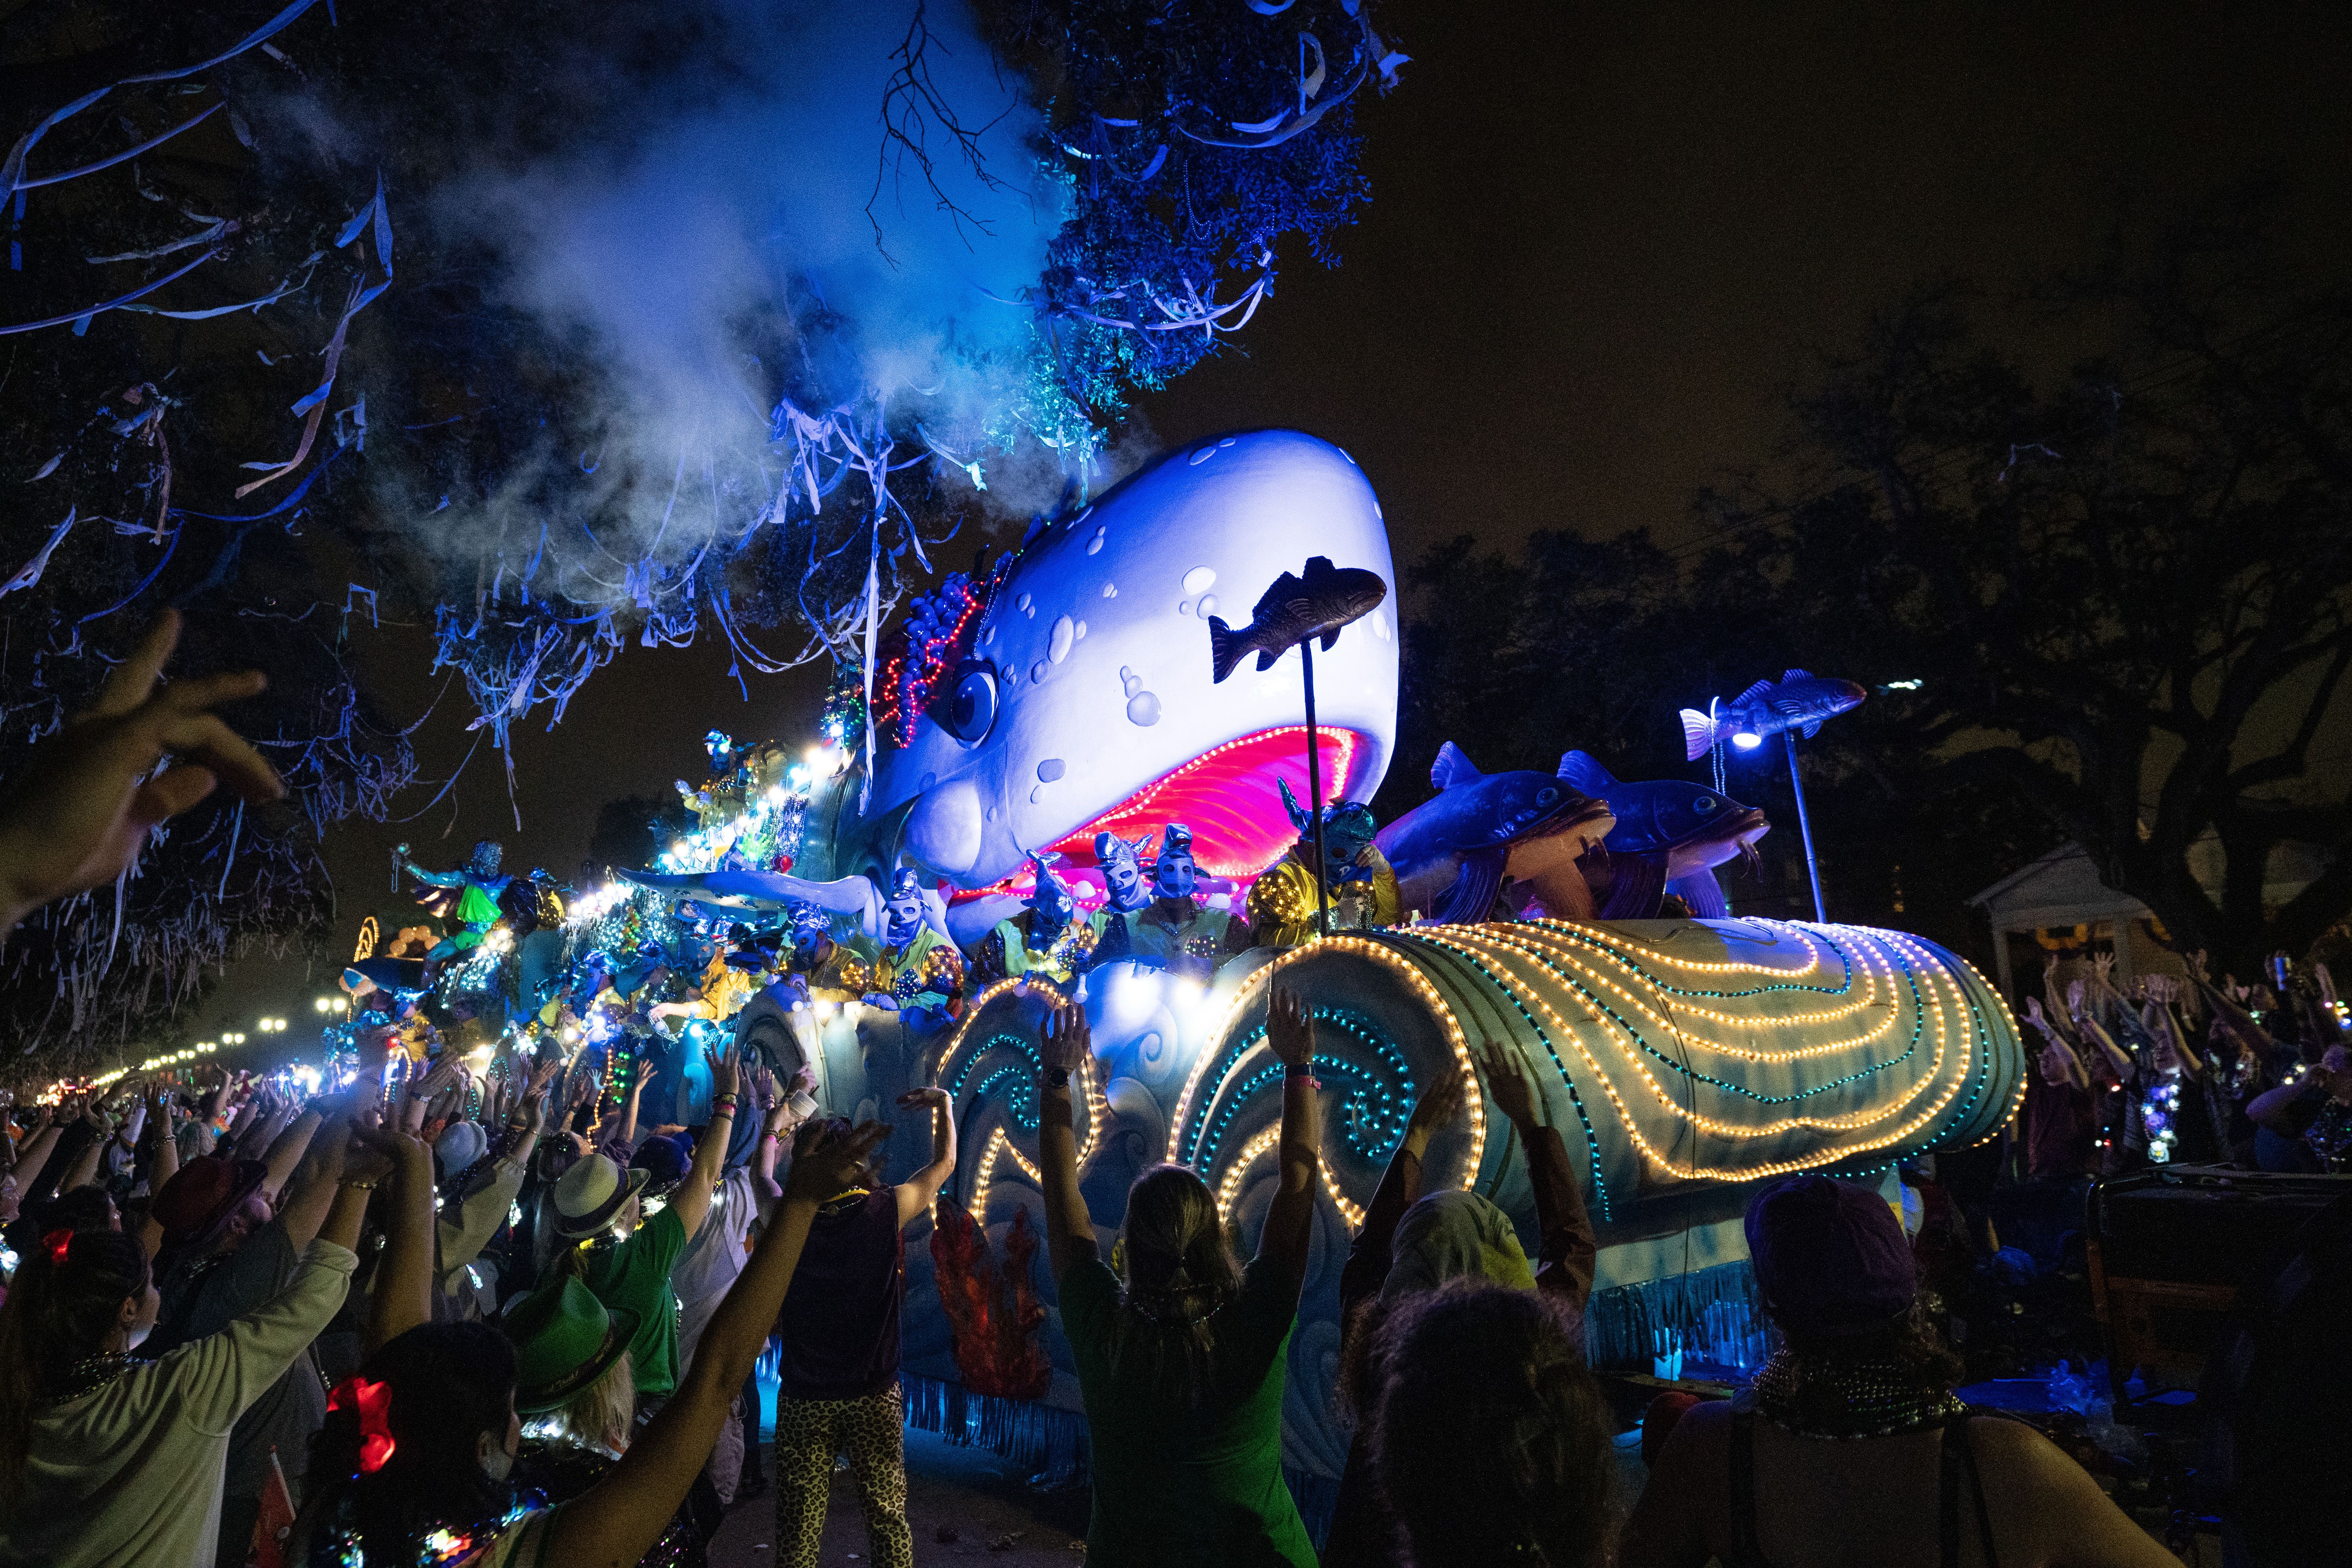 A whale-shaped float heads down the parade route, lighted up at night.